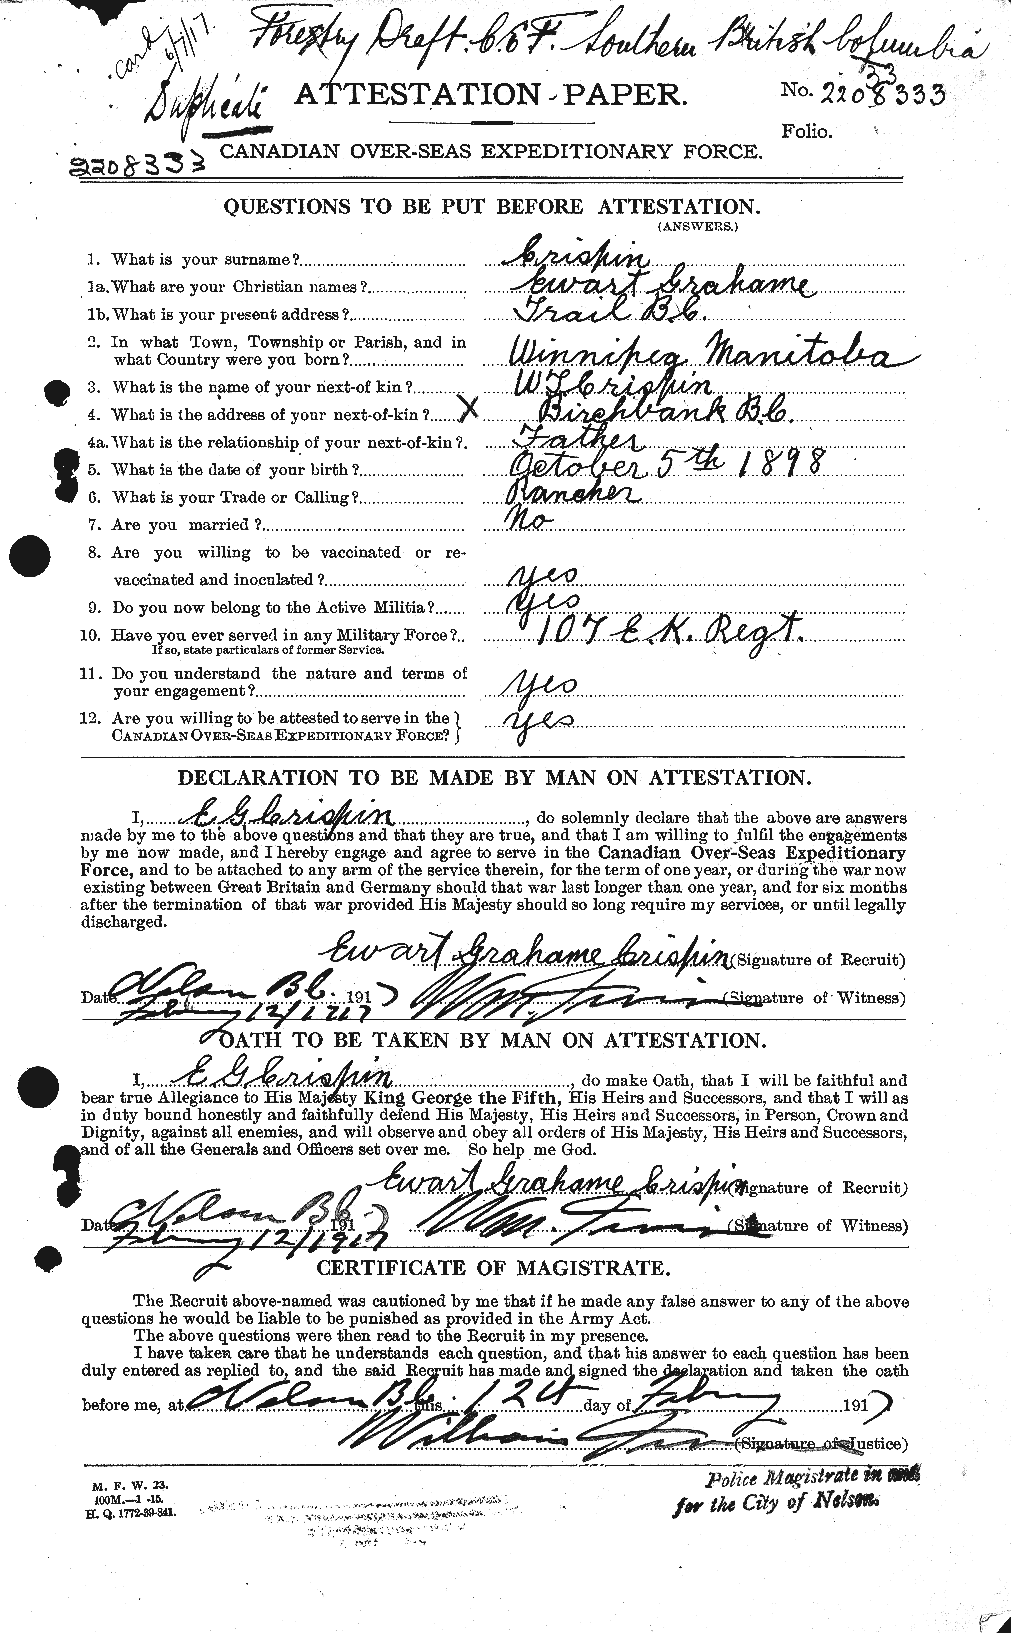 Personnel Records of the First World War - CEF 065360a